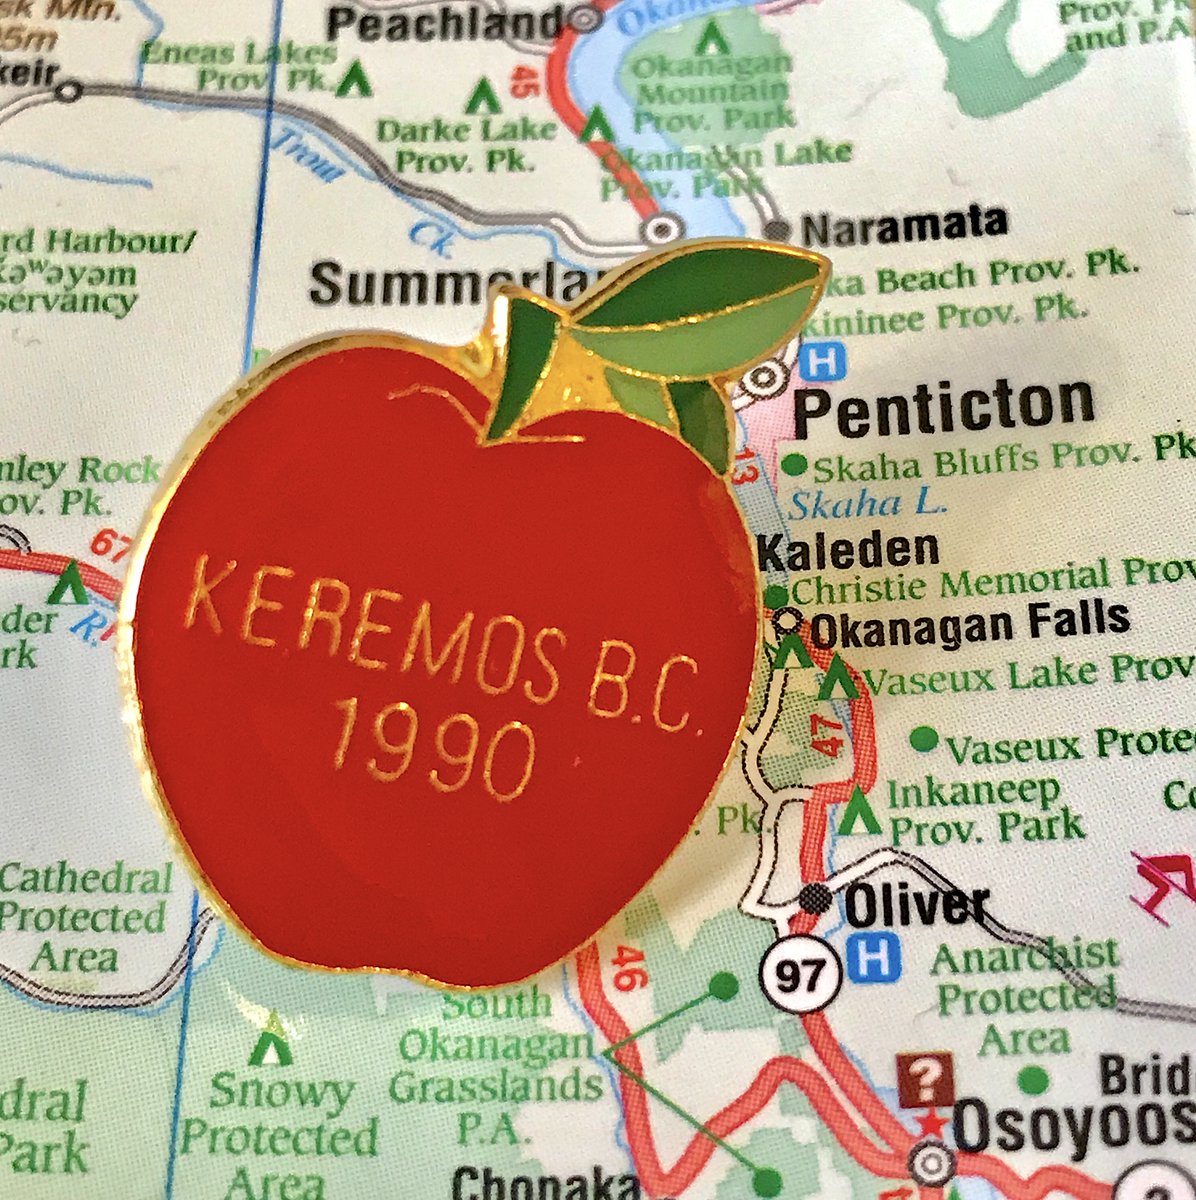 68. KEREMEOS- The spelling mistake on the apple is hilarious- Also Keremeos incorporated in 1956, what happened in 1990- Cute and on brand though- Modern corporate pin is not bad, "Kindness and Friendship" makes me smile